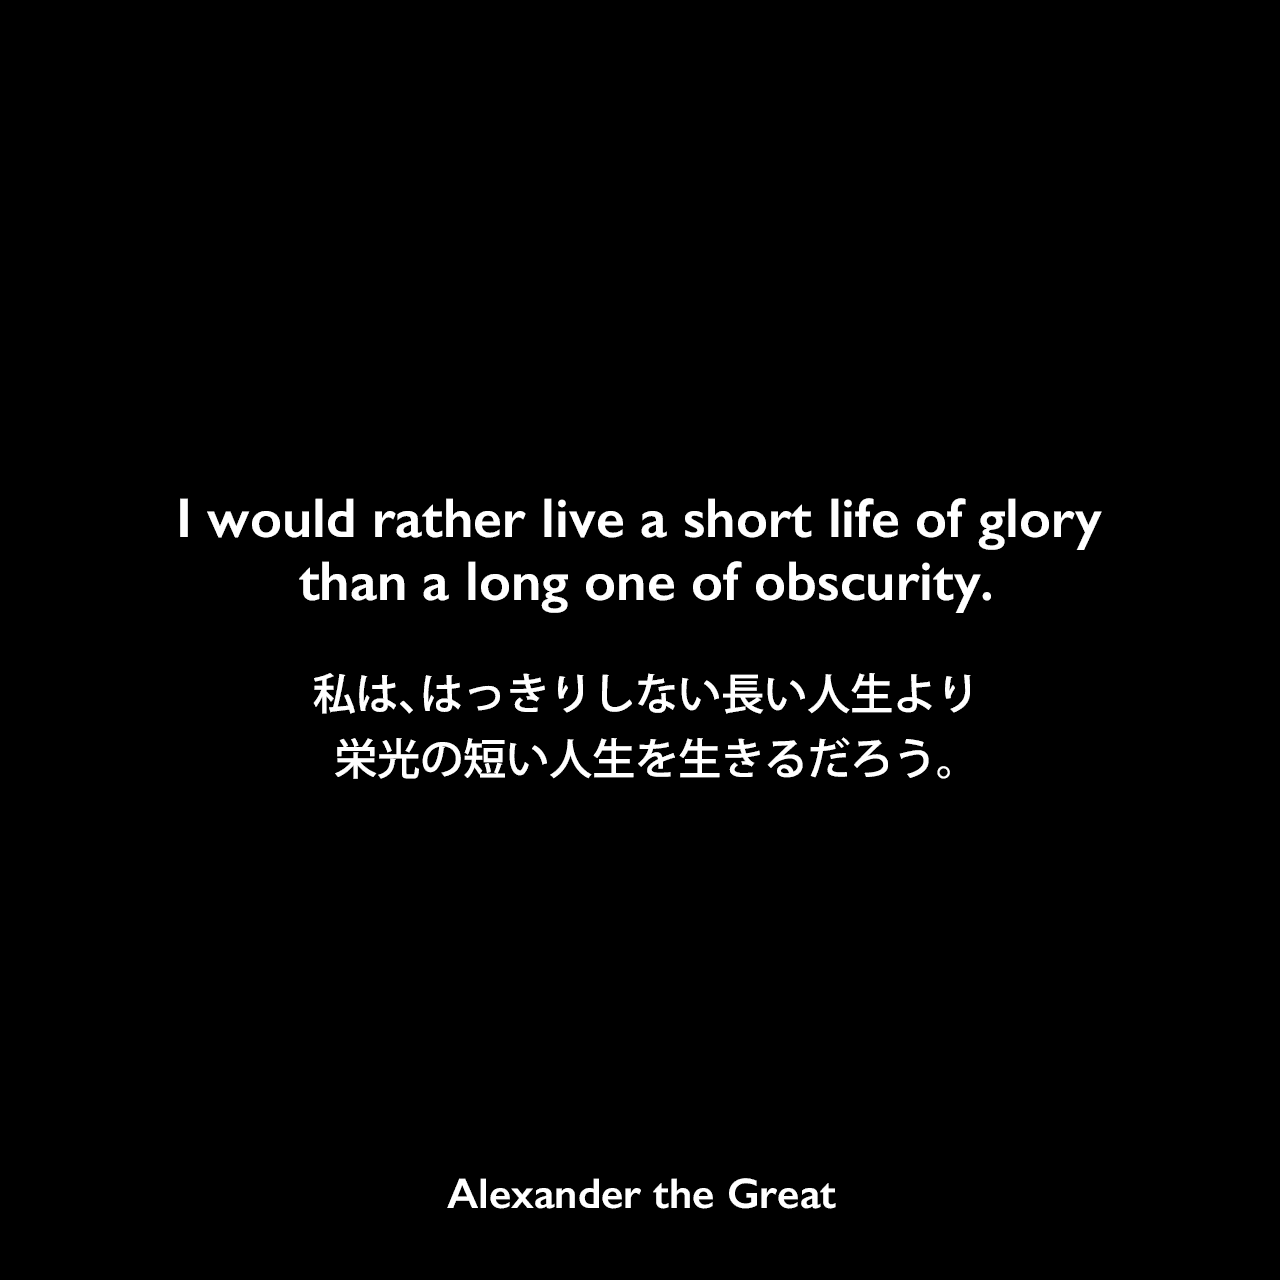 I would rather live a short life of glory than a long one of obscurity.私は、はっきりしない長い人生より栄光の短い人生を生きるだろう。Alexander the Great